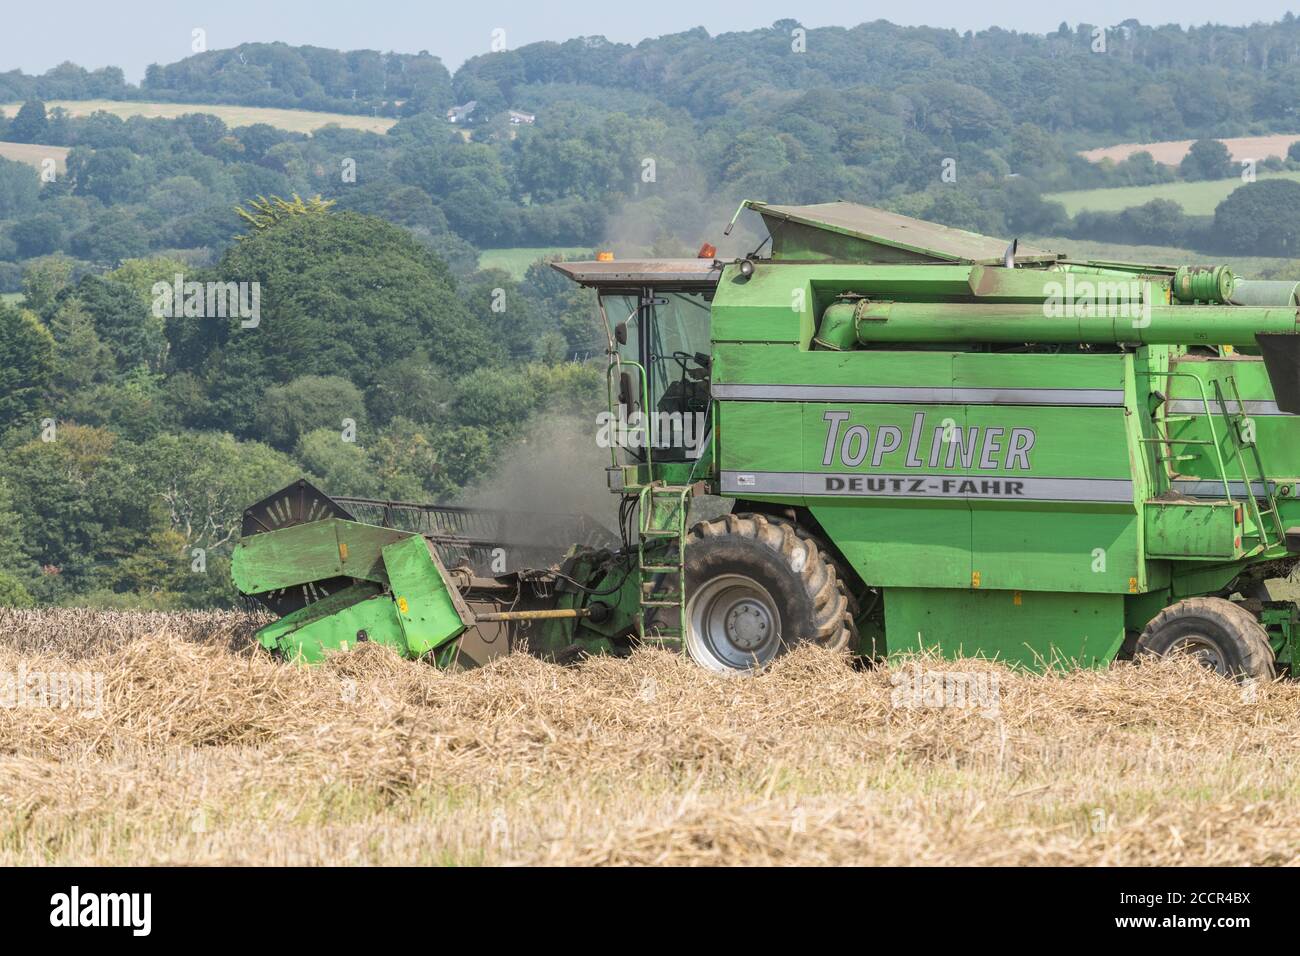 Deutz-Fahr 4065 combine harvester cutting 2020 UK wheat crop on hot summer day & filling air with dust. Tine reel and operator cab visible. UK wheat. Stock Photo